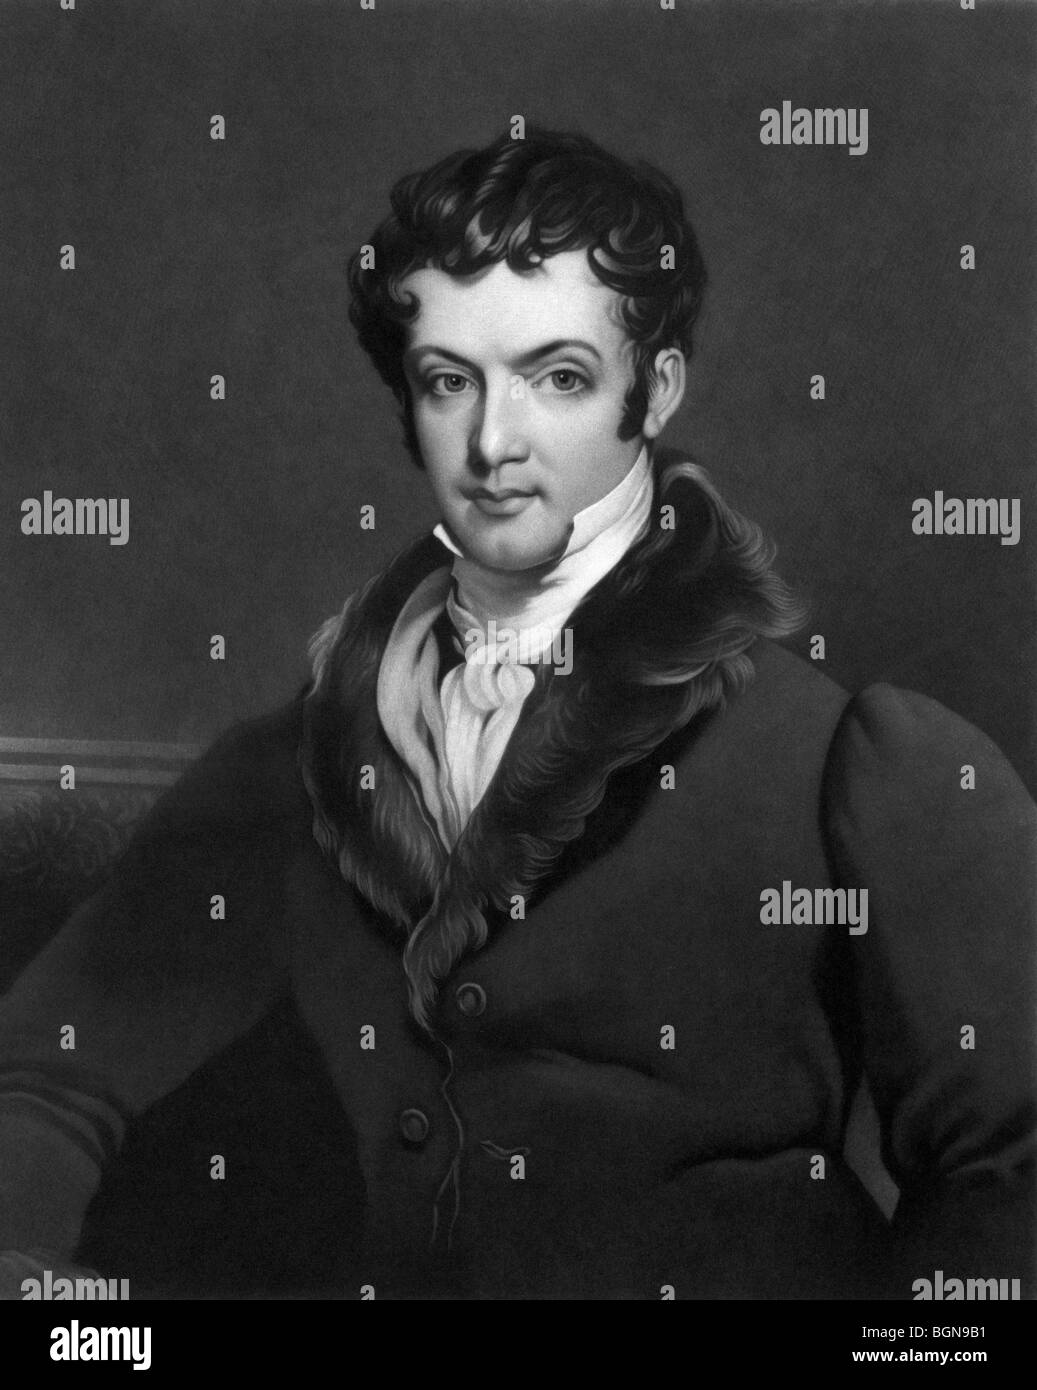 Portrait c1896 of American writer Washington Irving (1783 - 1859) - author of Rip Van Winkle and The Legend of Sleepy Hollow. Stock Photo